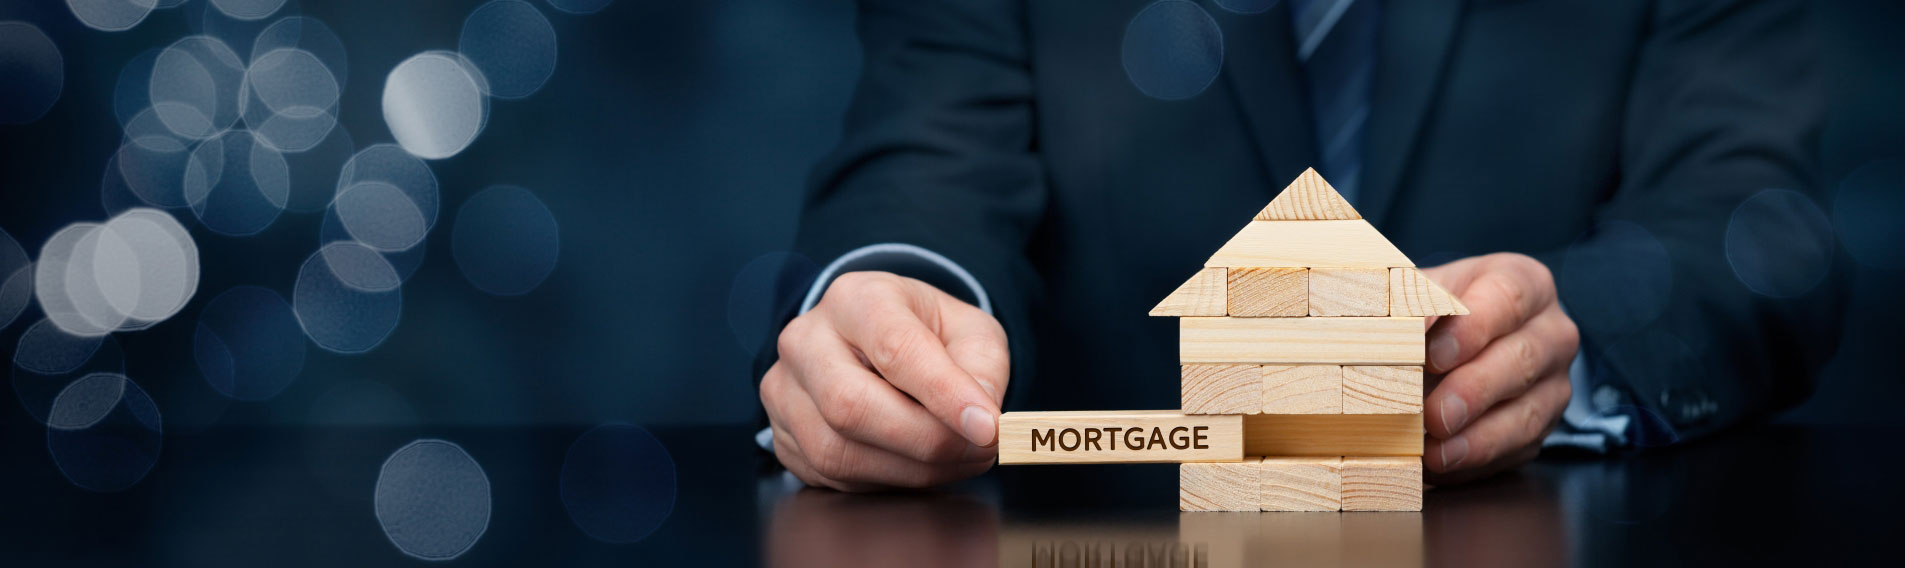 Mortgage Industry Services